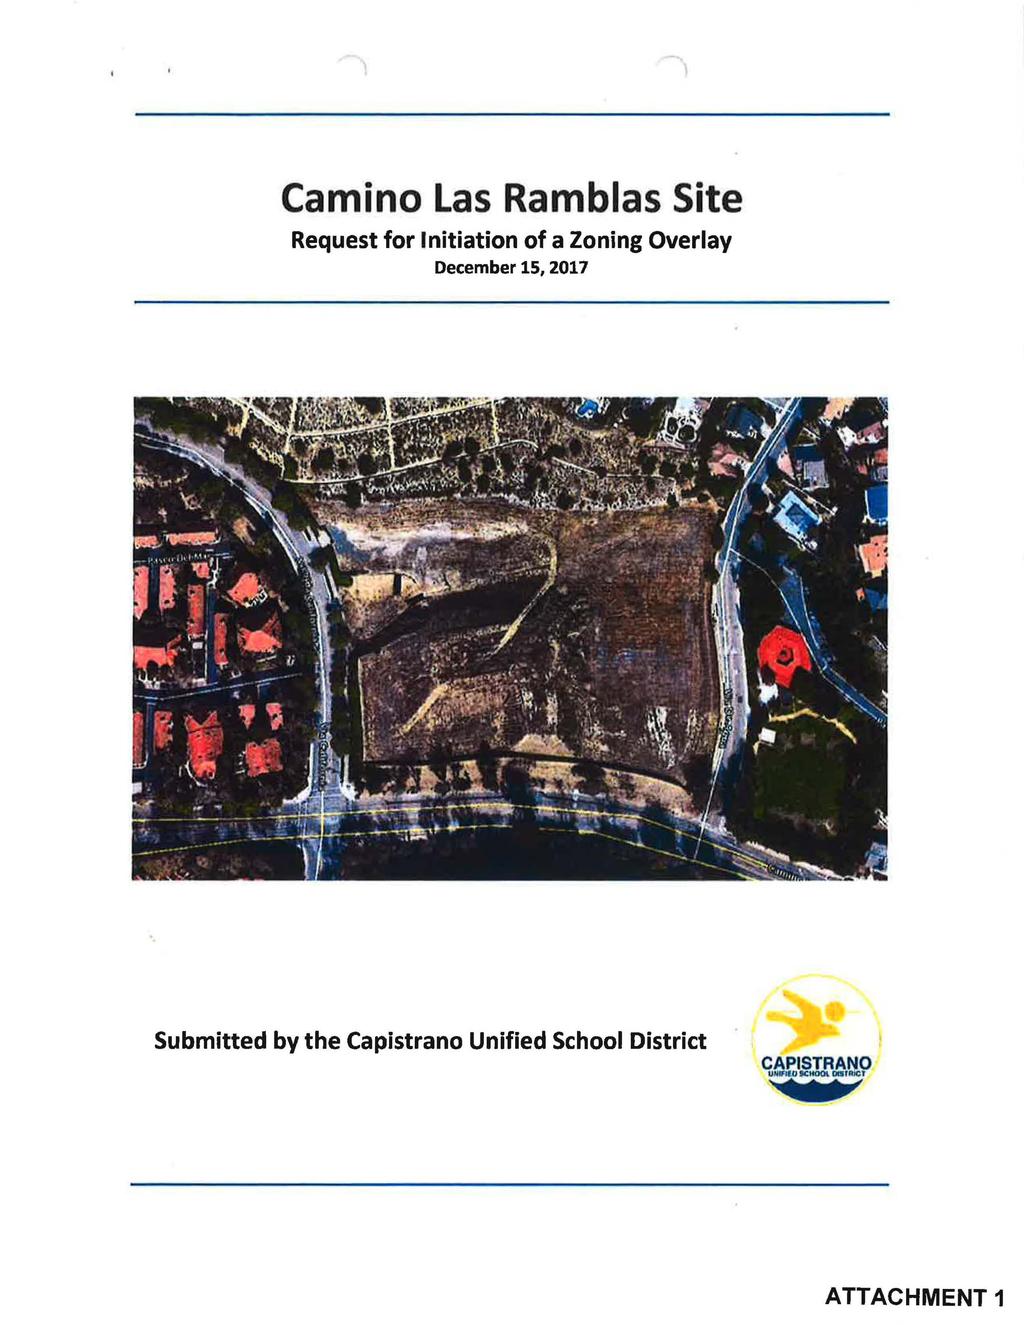 Camino Las Ramblas Site Request for Initiation of a Zoning Overlay